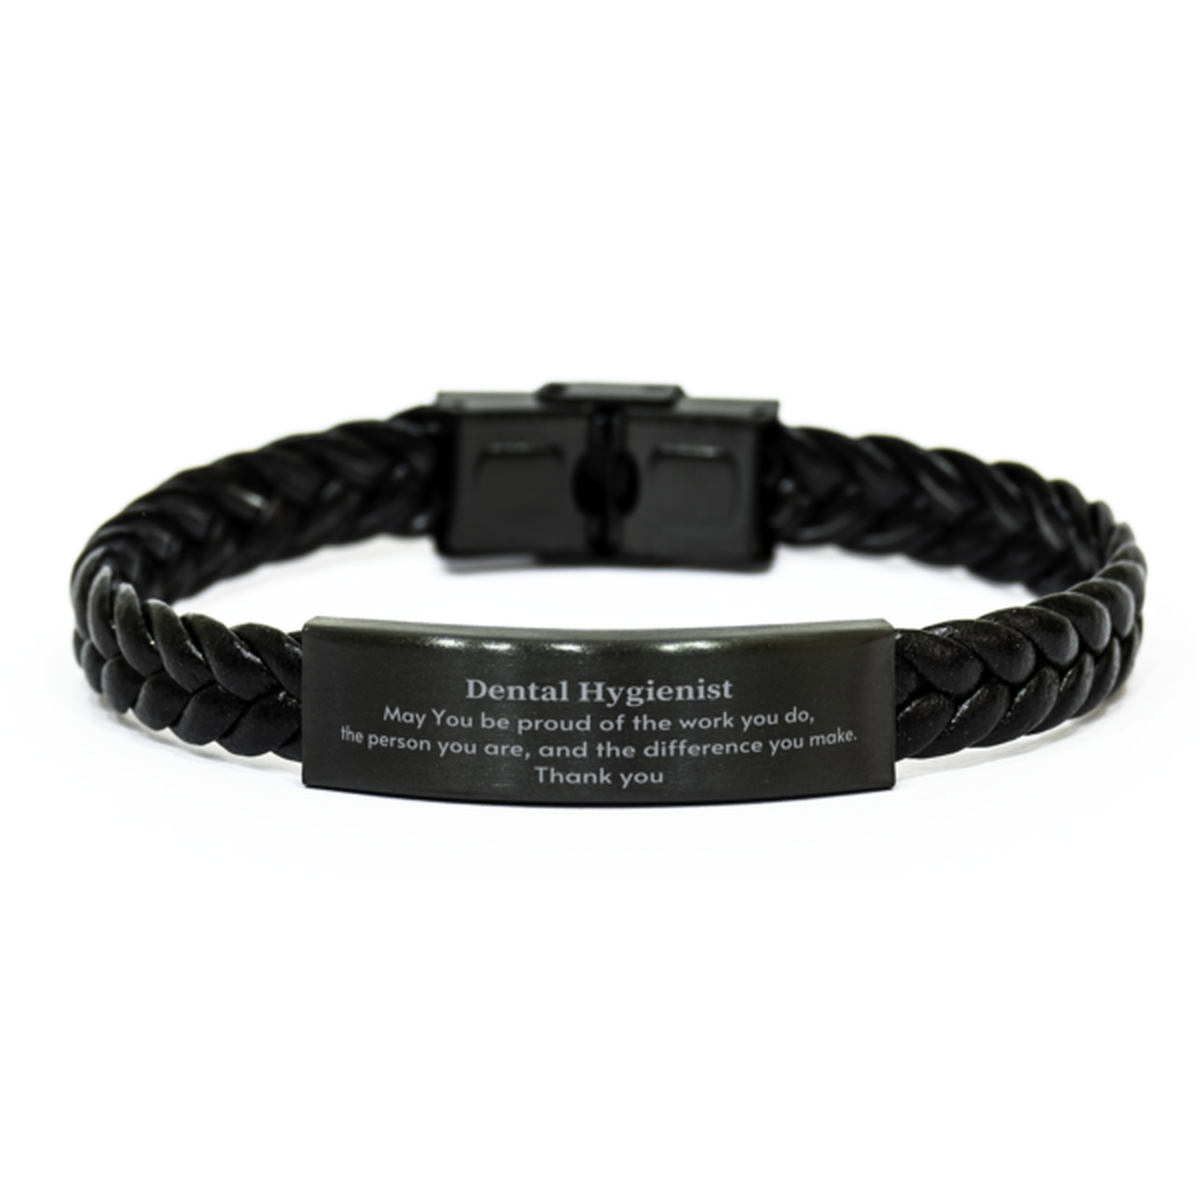 Heartwarming Braided Leather Bracelet Retirement Coworkers Gifts for Dental Hygienist, Dental Hygienist May You be proud of the work you do, the person you are Gifts for Boss Men Women Friends